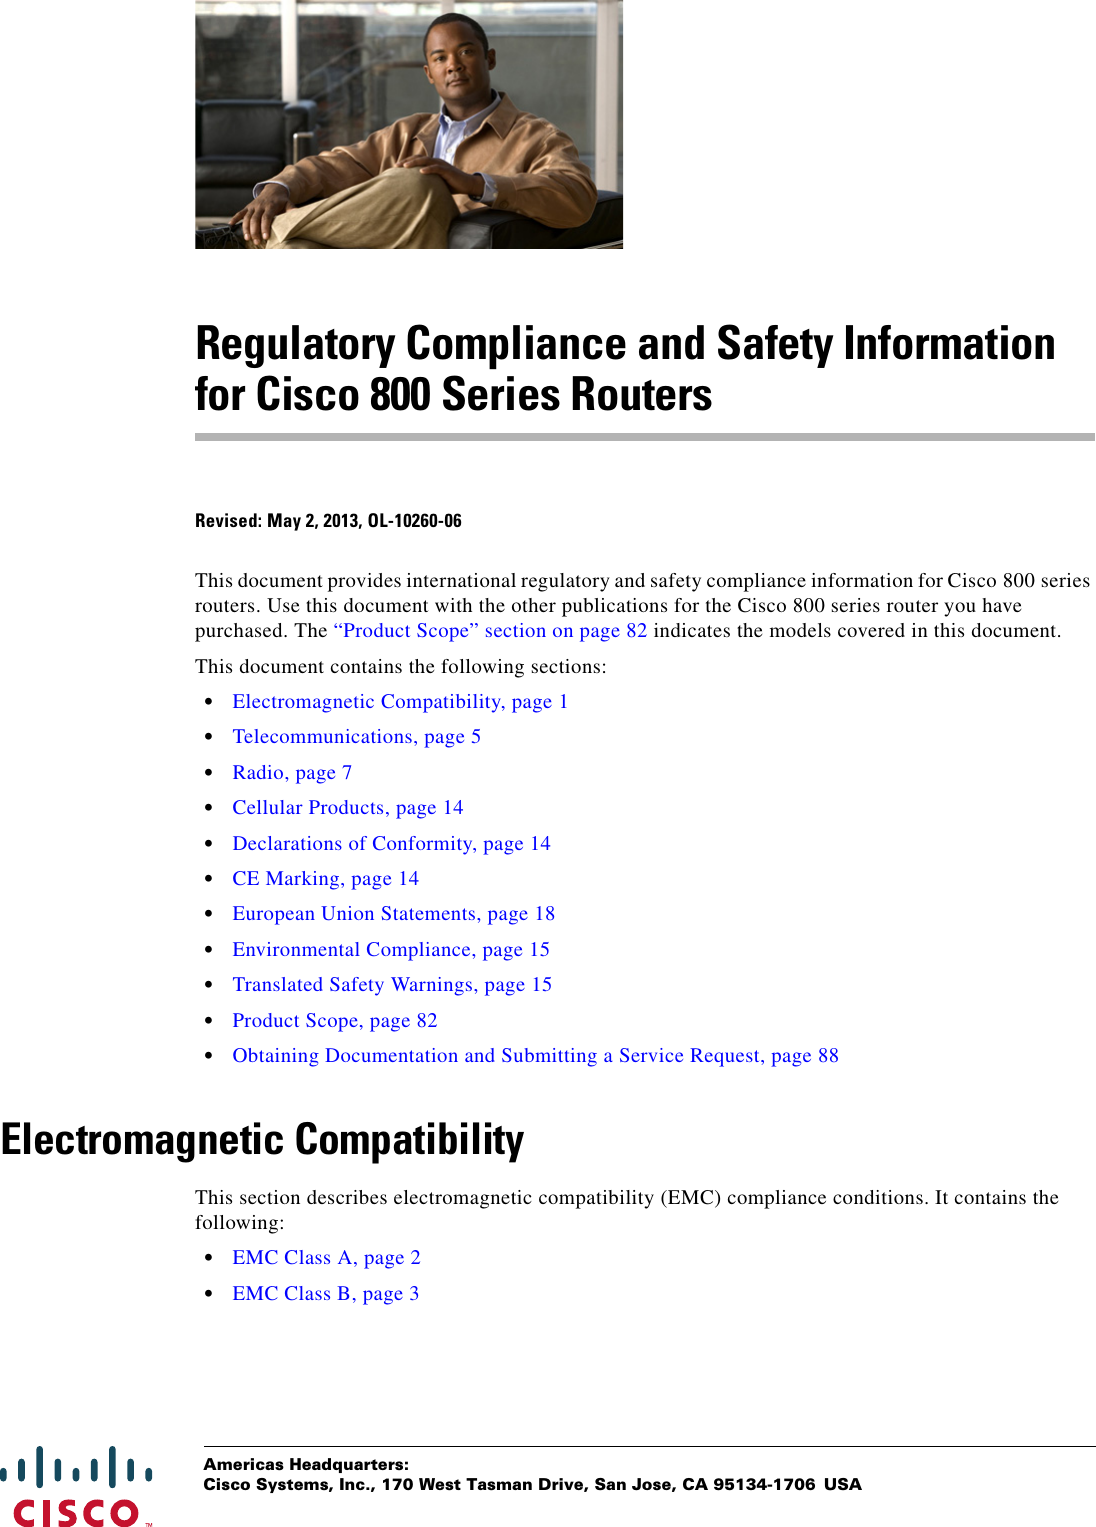 Americas Headquarters:Cisco Systems, Inc., 170 West Tasman Drive, San Jose, CA 95134-1706 USARegulatory Compliance and Safety Information for Cisco 800 Series RoutersRevised: May 2, 2013, OL-10260-06This document provides international regulatory and safety compliance information for Cisco 800 series routers. Use this document with the other publications for the Cisco 800 series router you have purchased. The “Product Scope” section on page 82 indicates the models covered in this document.This document contains the following sections:   • Electromagnetic Compatibility, page 1  • Telecommunications, page 5  • Radio, page 7  • Cellular Products, page 14  • Declarations of Conformity, page 14  • CE Marking, page 14  • European Union Statements, page 18  • Environmental Compliance, page 15  • Translated Safety Warnings, page 15  • Product Scope, page 82  • Obtaining Documentation and Submitting a Service Request, page 88Electromagnetic CompatibilityThis section describes electromagnetic compatibility (EMC) compliance conditions. It contains the following:  • EMC Class A, page 2  • EMC Class B, page 3